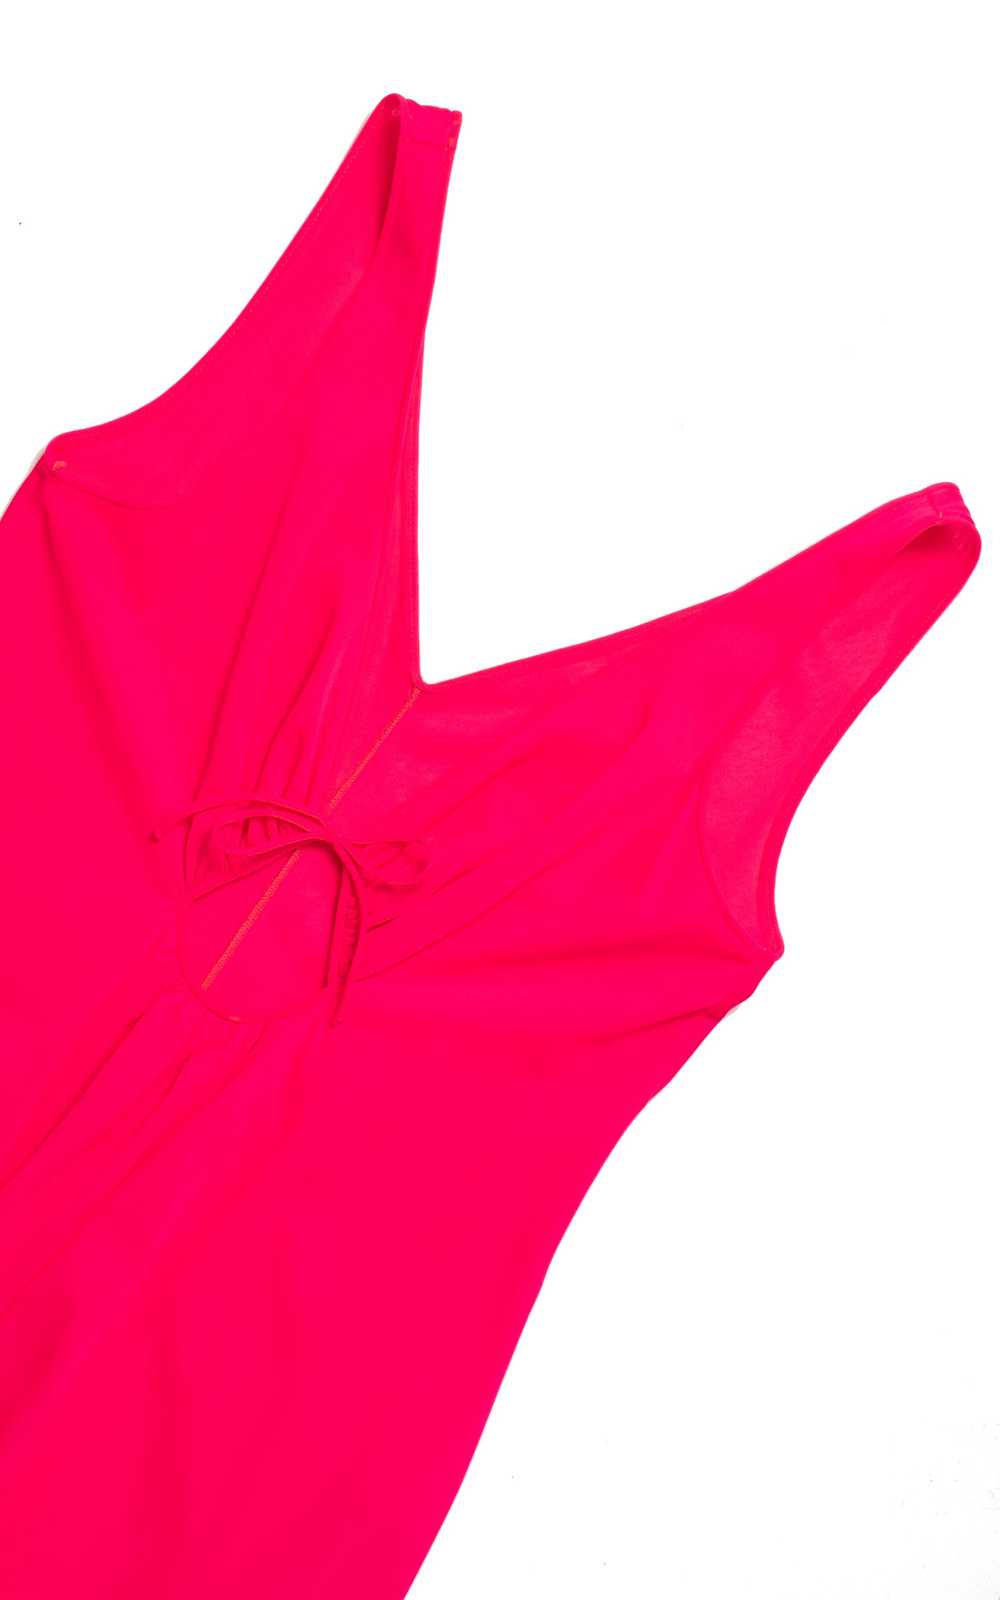 1970s Neon Hot Pink Nightgown | small/medium/large - image 9